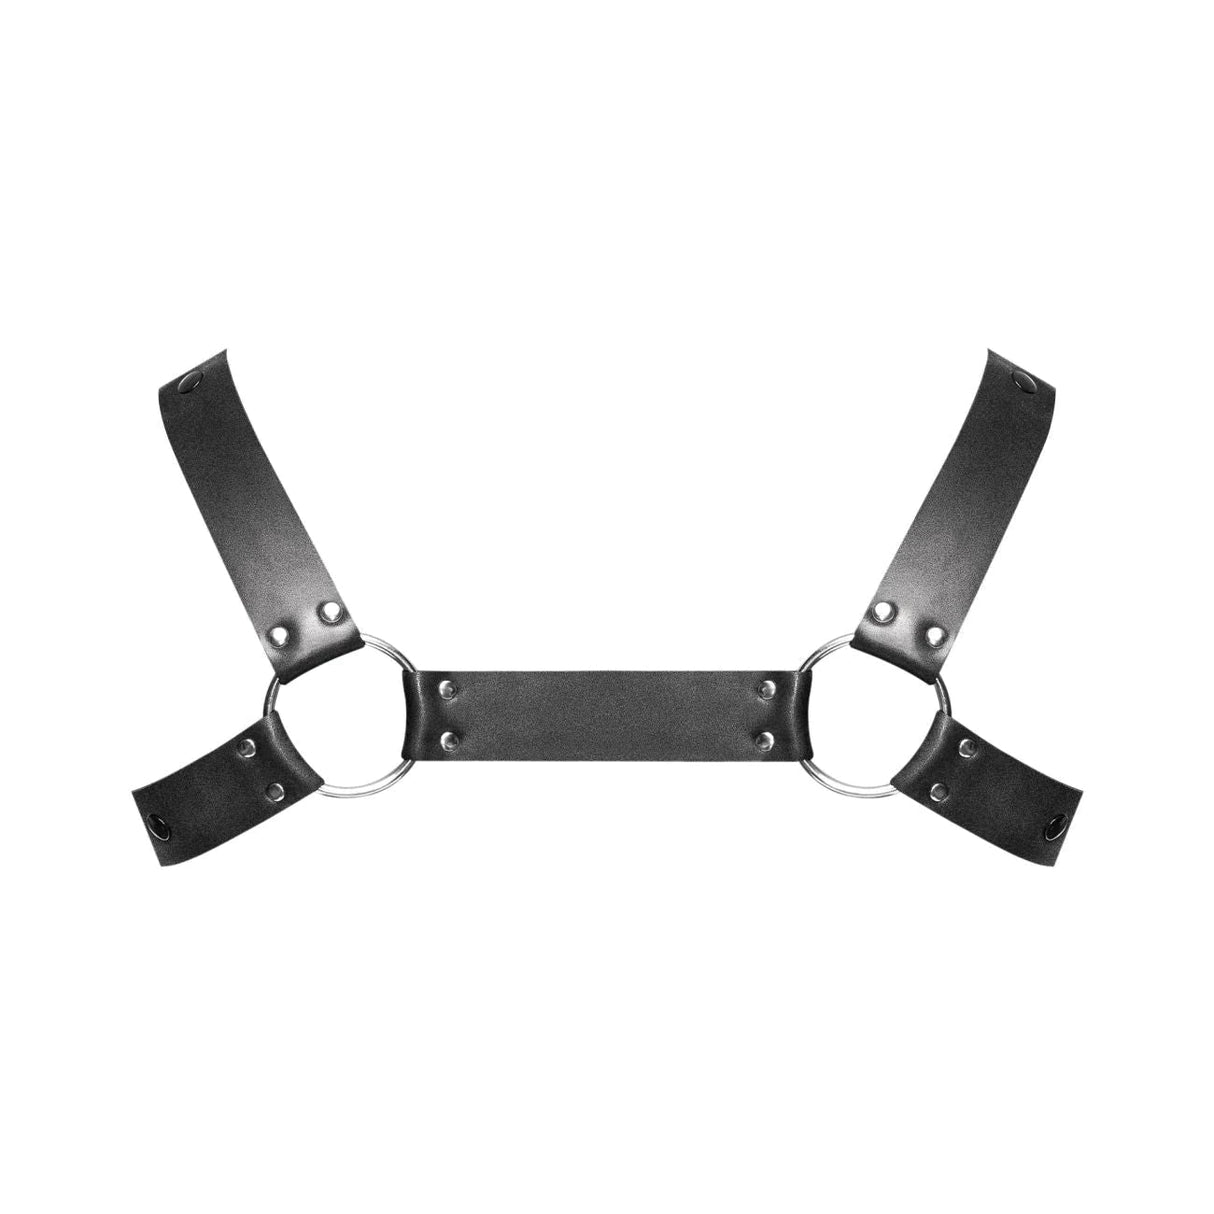 Virgo PU Leather Chest Harness